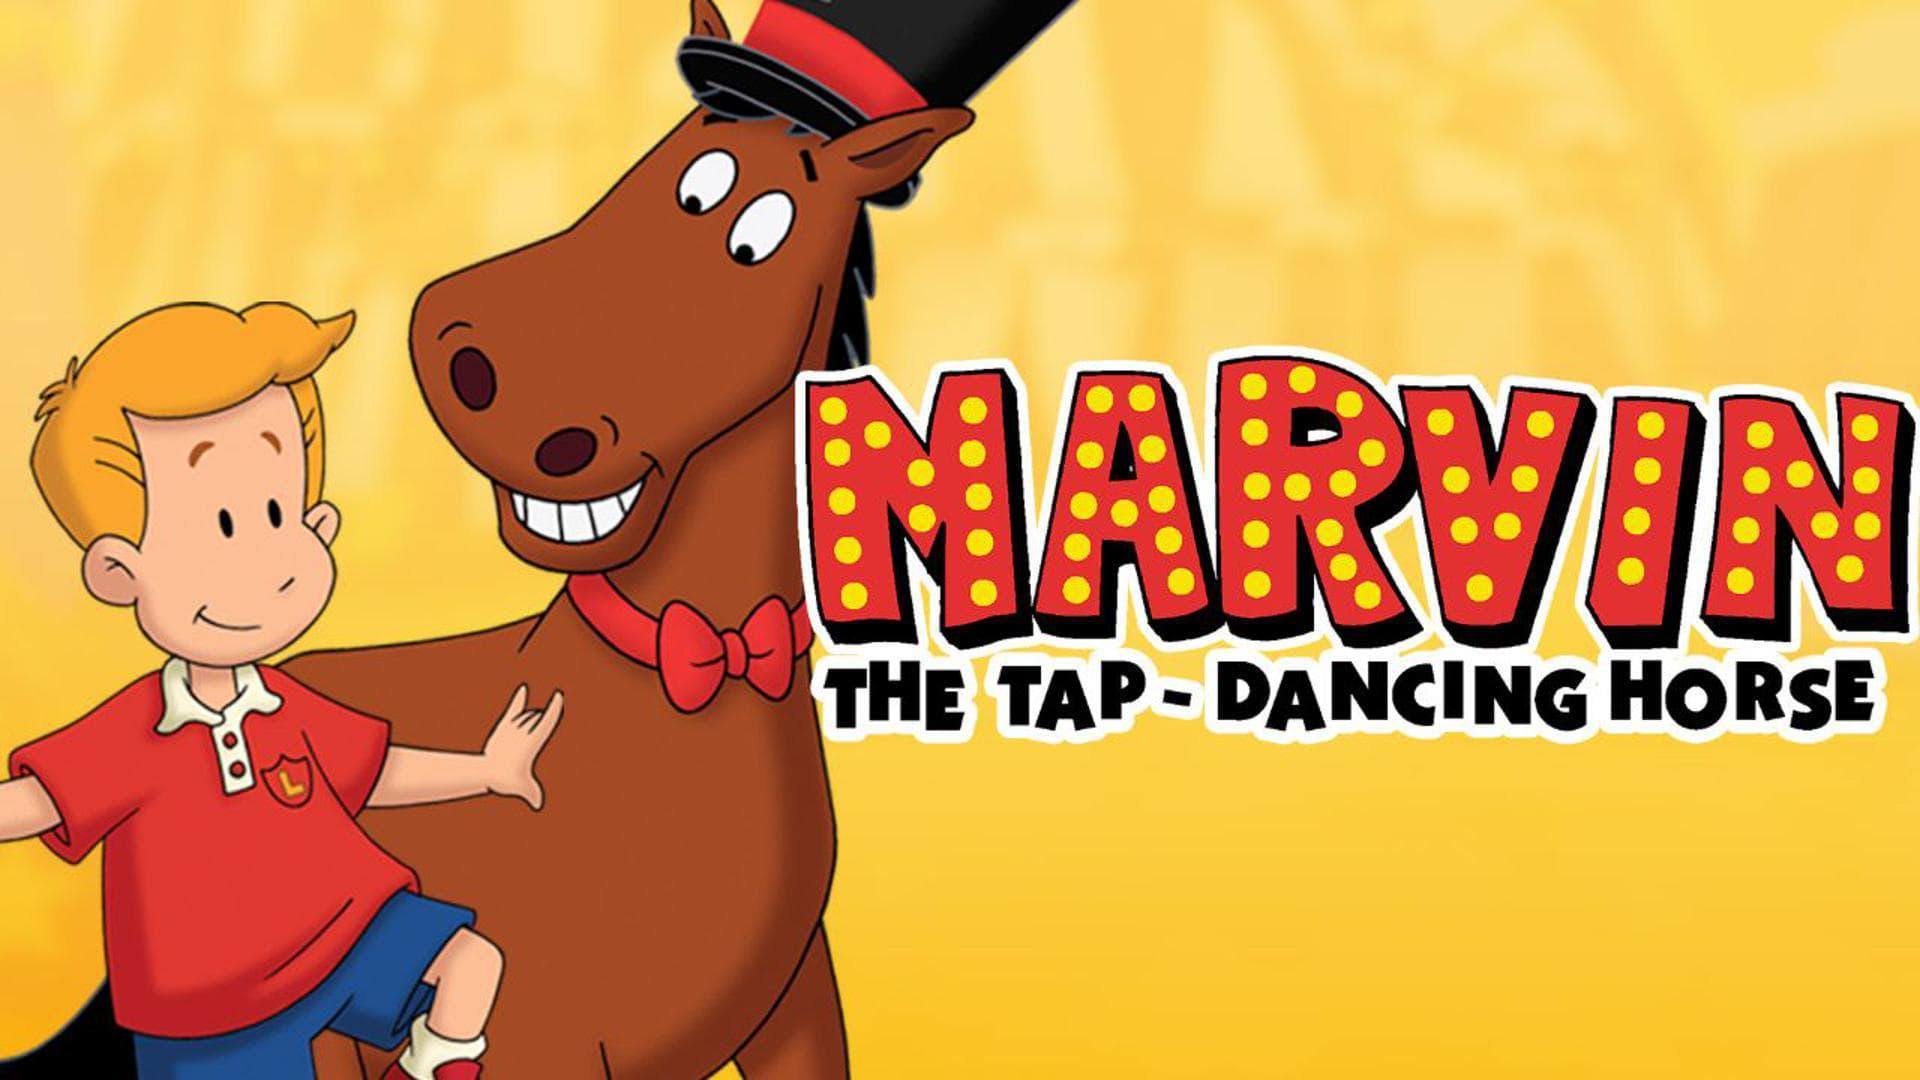 Marvin the Tap-Dancing Horse backdrop